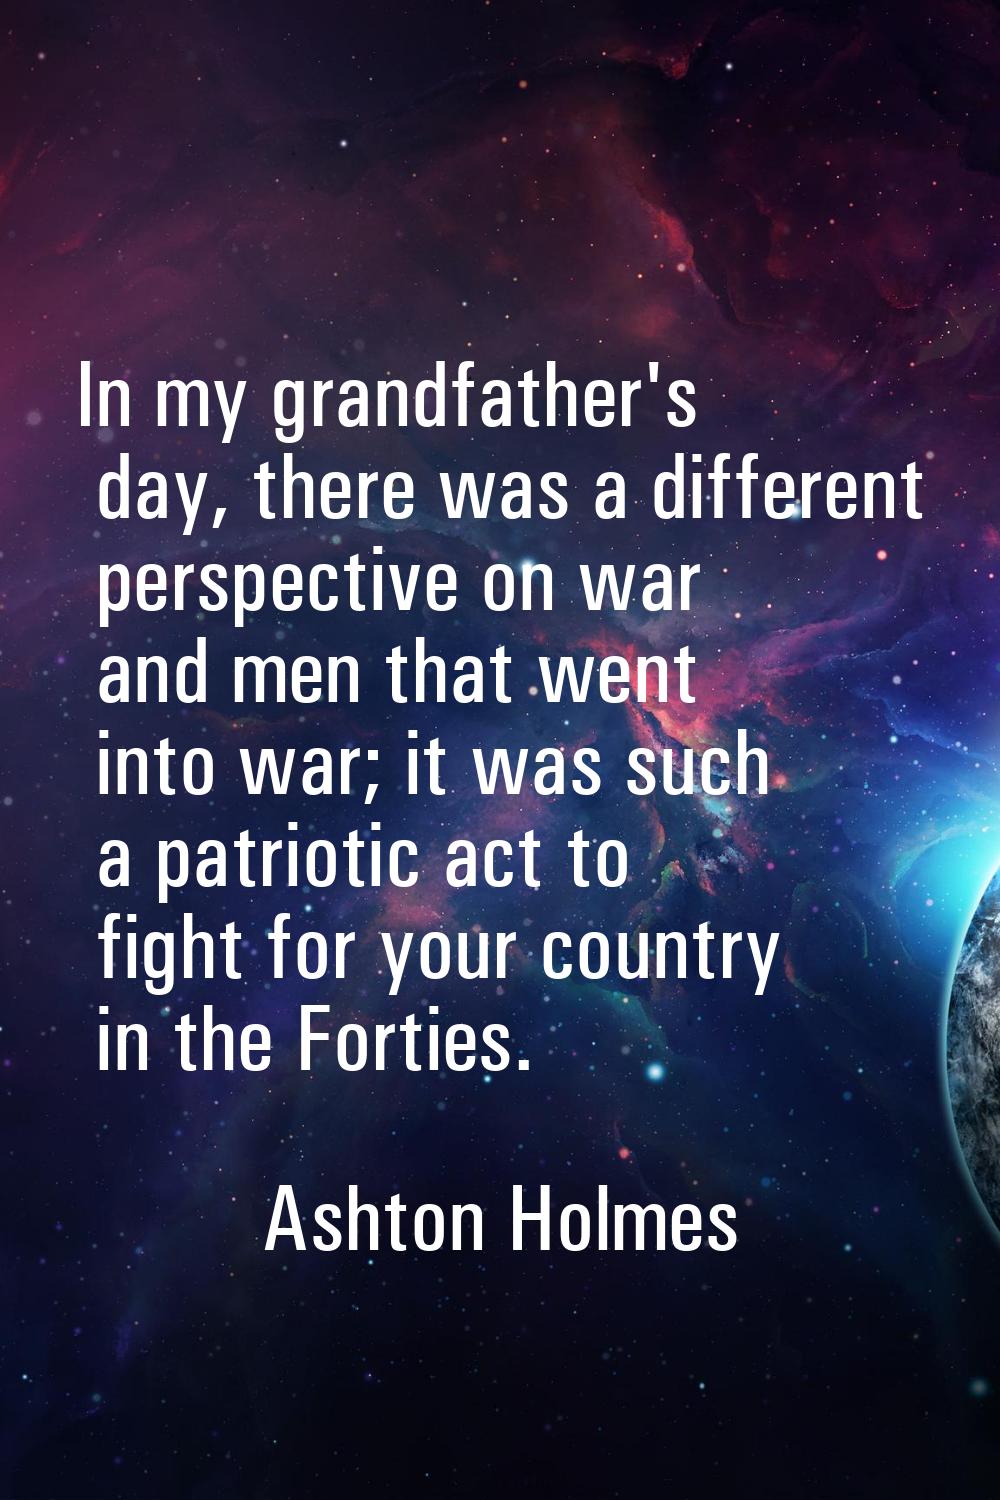 In my grandfather's day, there was a different perspective on war and men that went into war; it wa